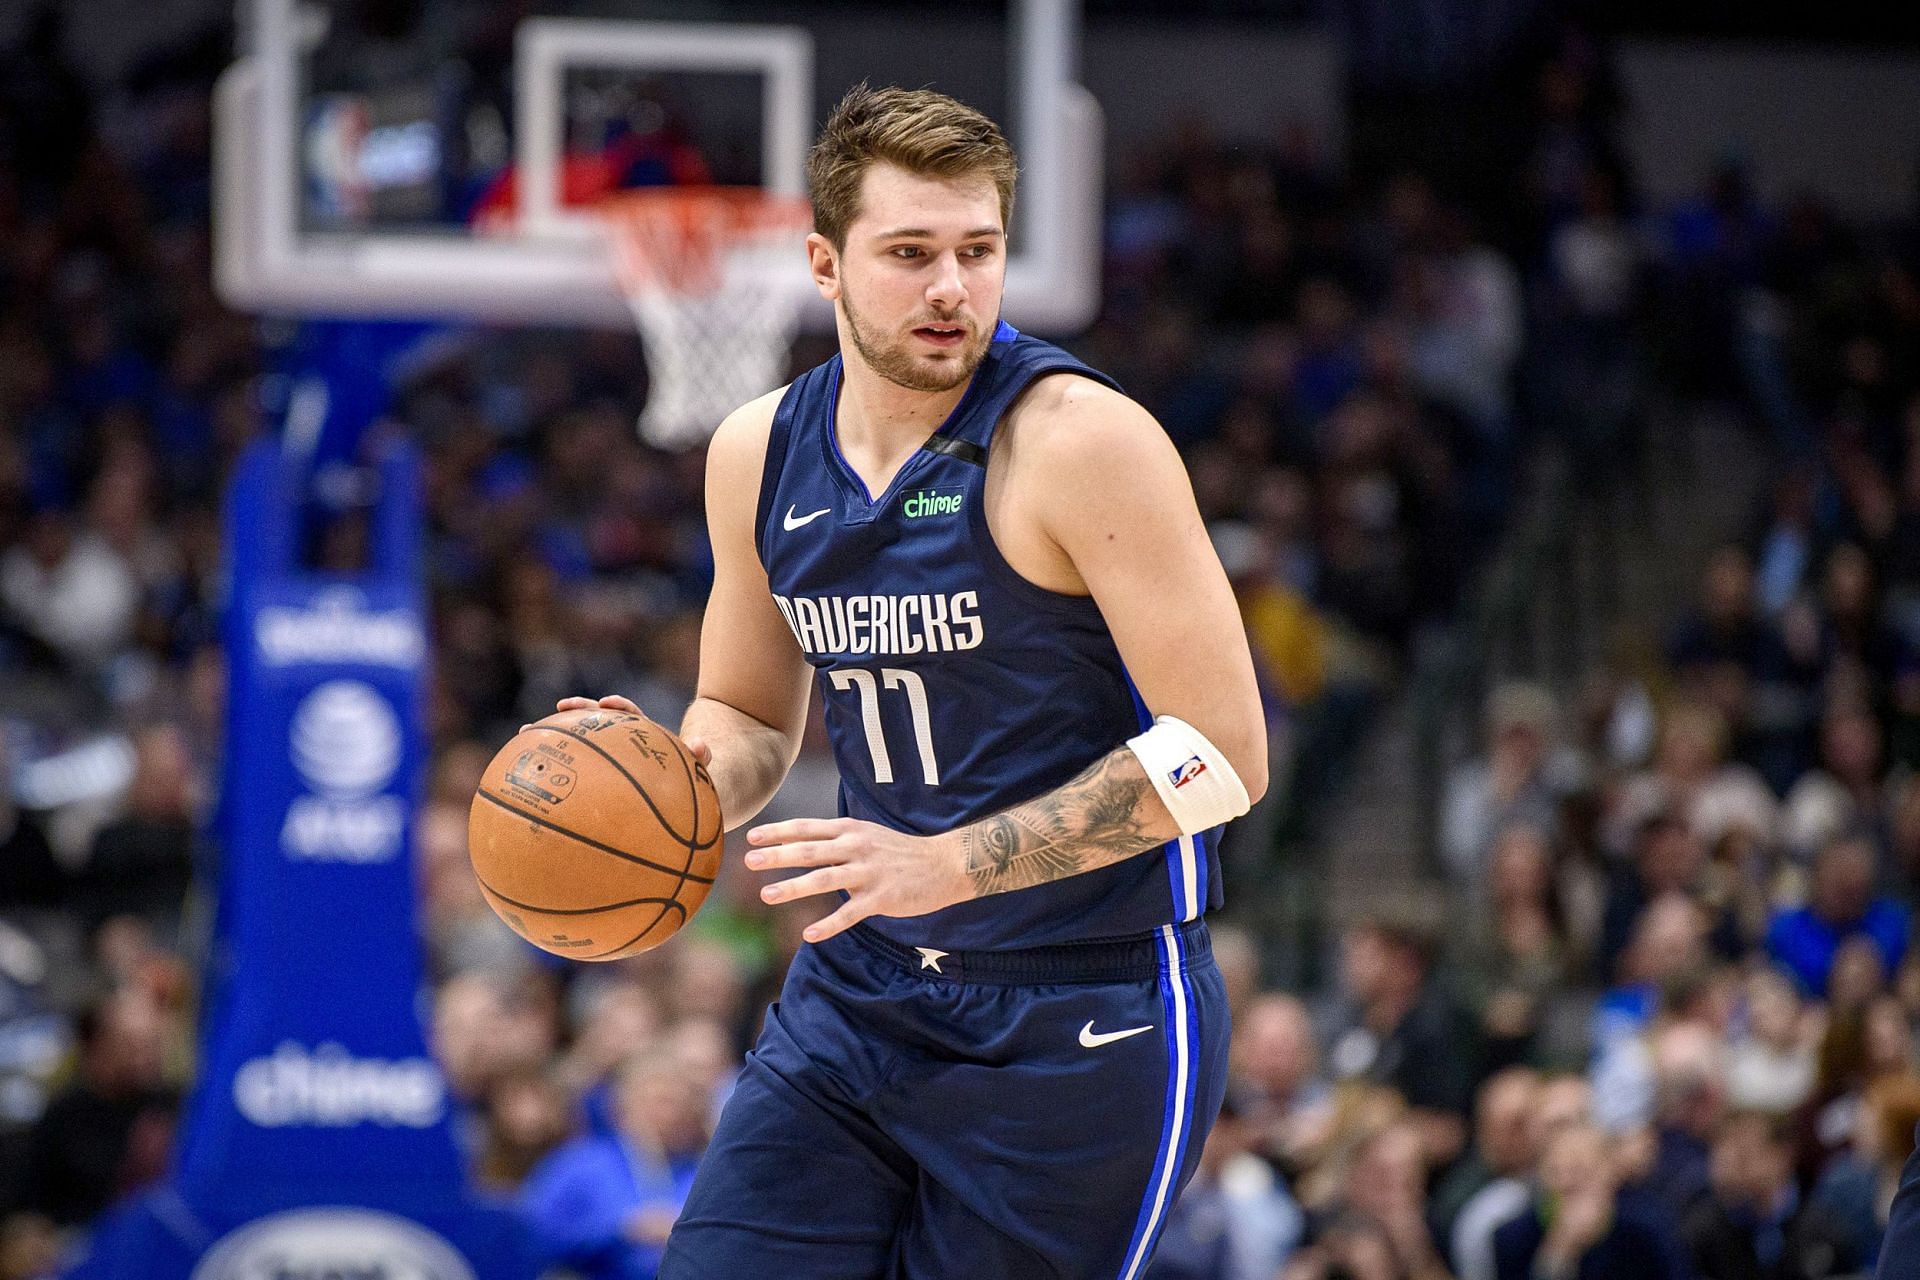 Dallas Mavericks star Luka Doncic will be the player to watch in this one.